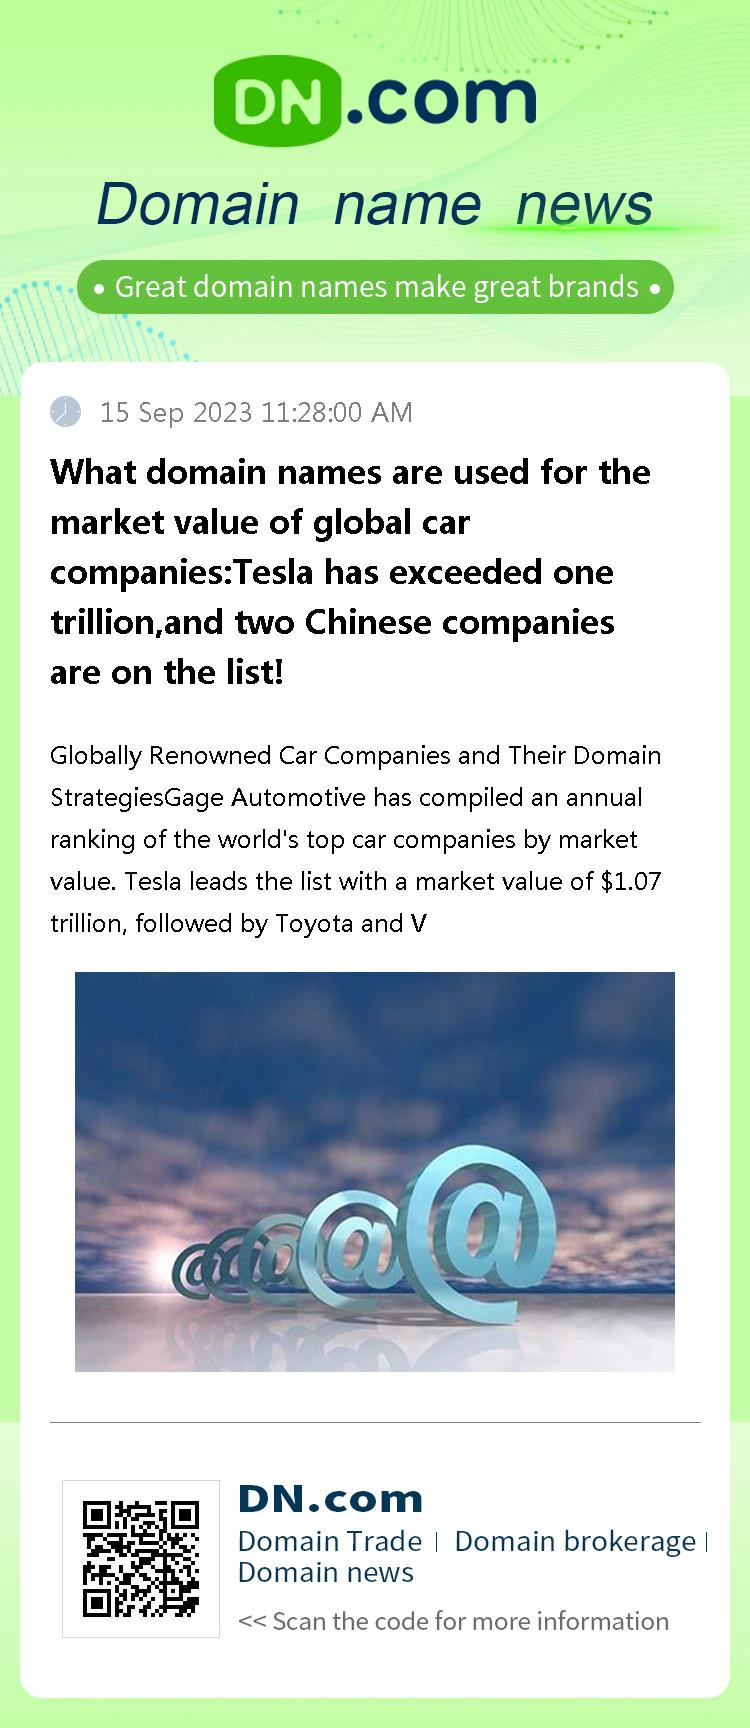 What domain names are used for the market value of global car companies:Tesla has exceeded one trillion,and two Chinese companies are on the list!